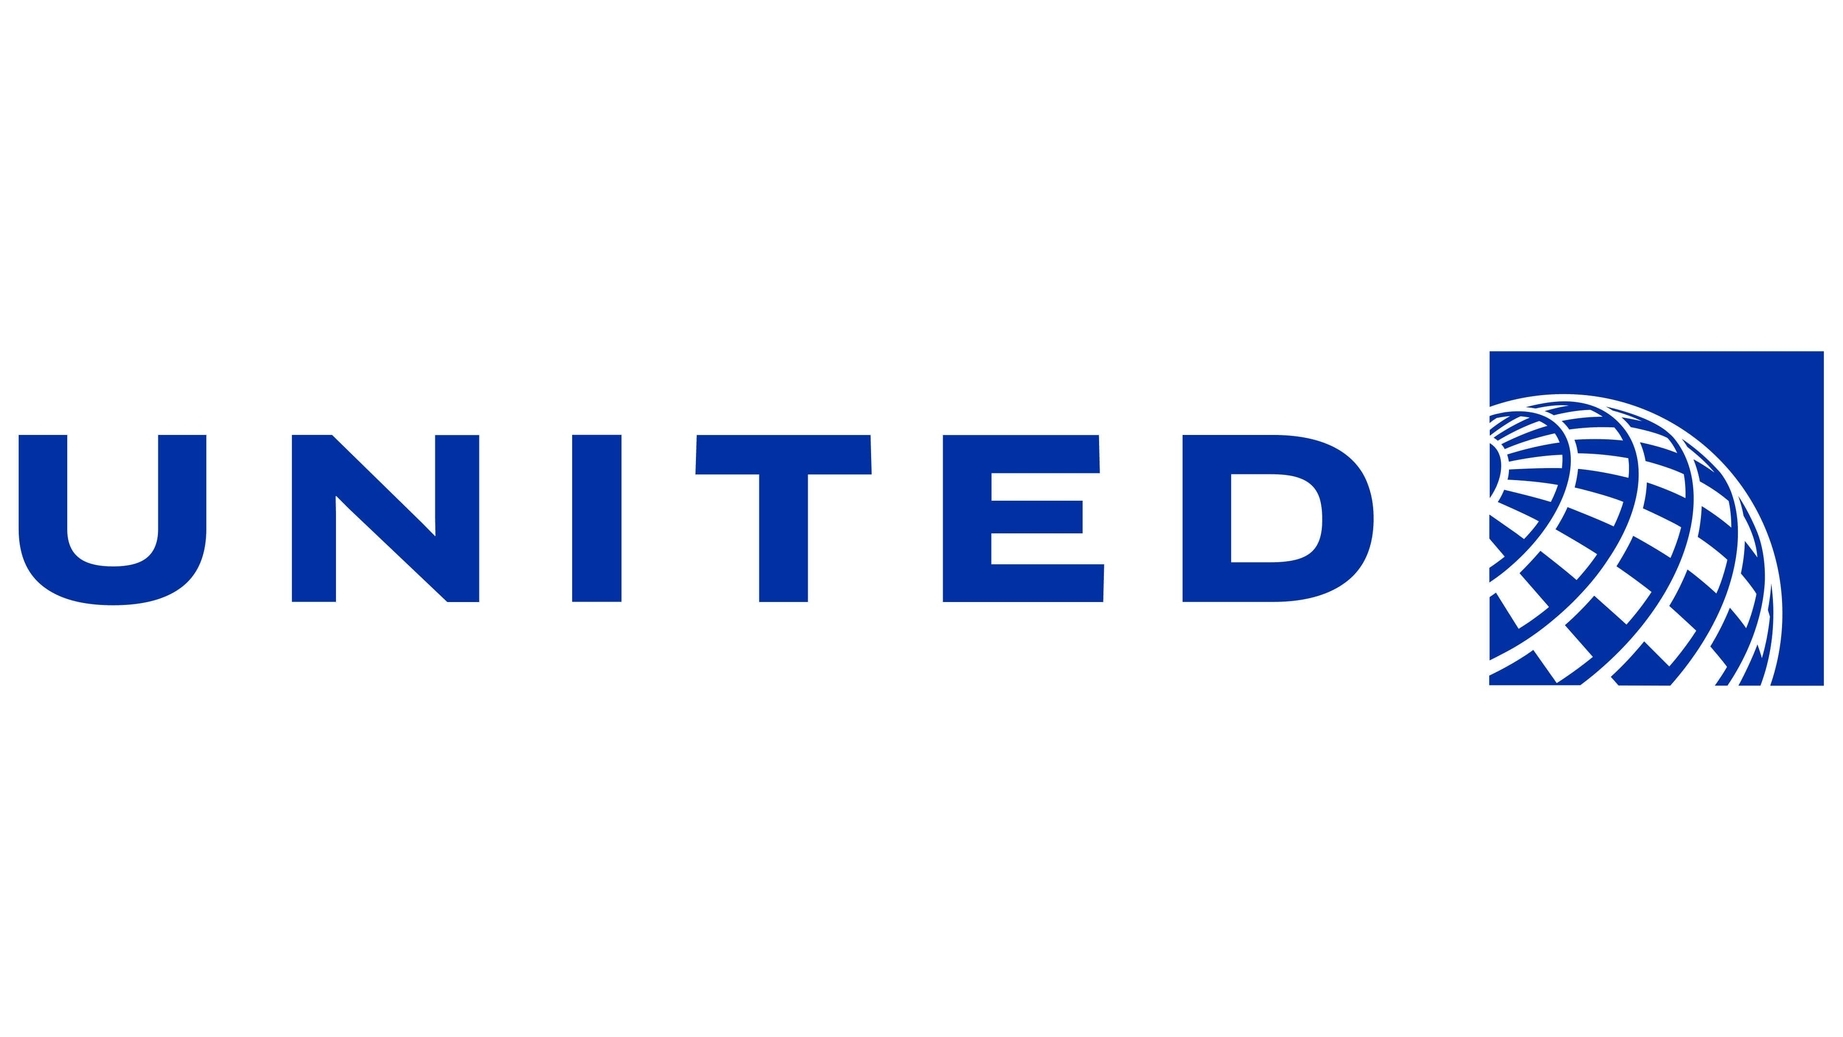 United airlines sign 2019 present